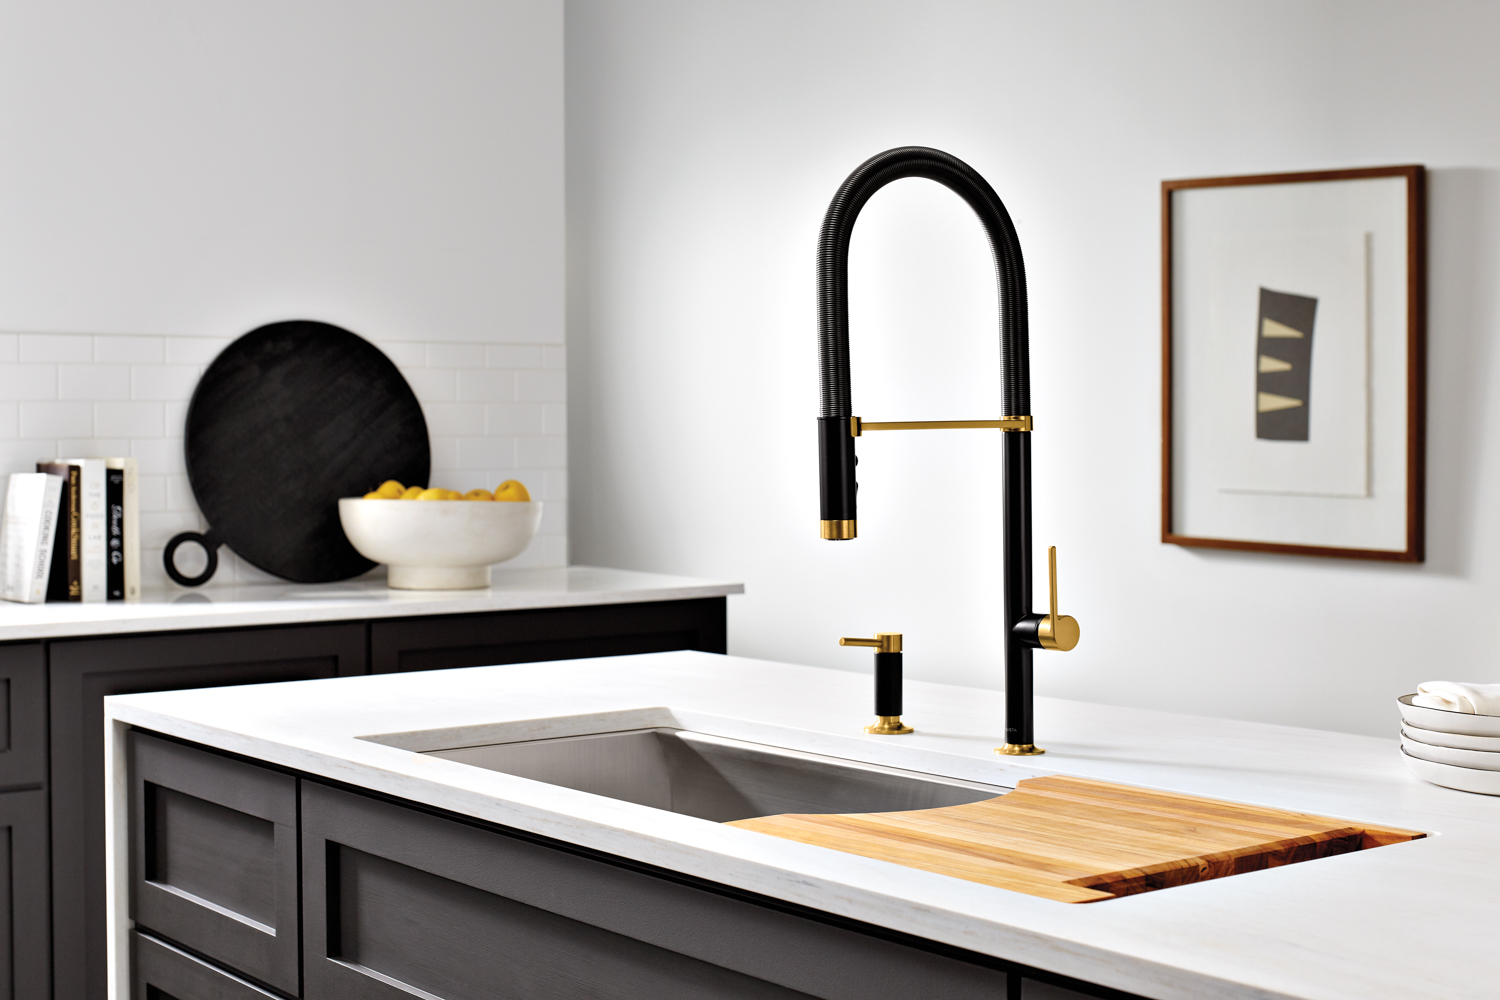 A black metal gooseneck faucet with gold accents in a modern black and white kitchen. RED Winner.